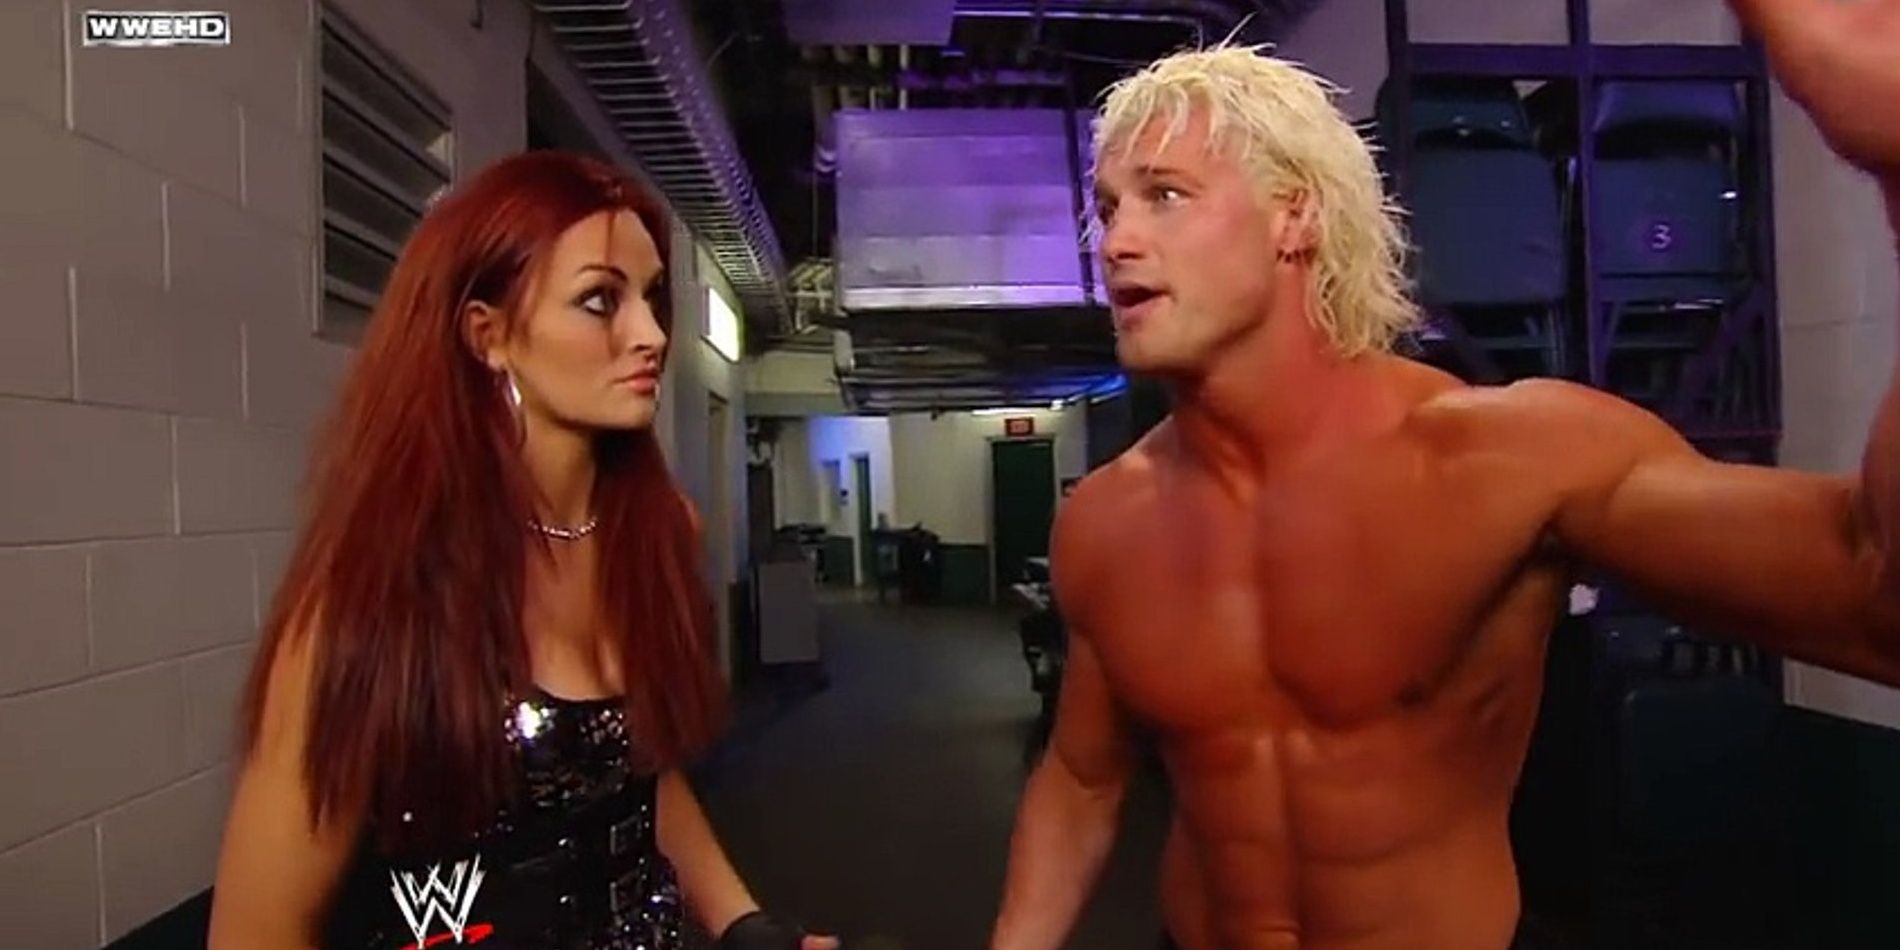 Dolph Ziggler and Maria